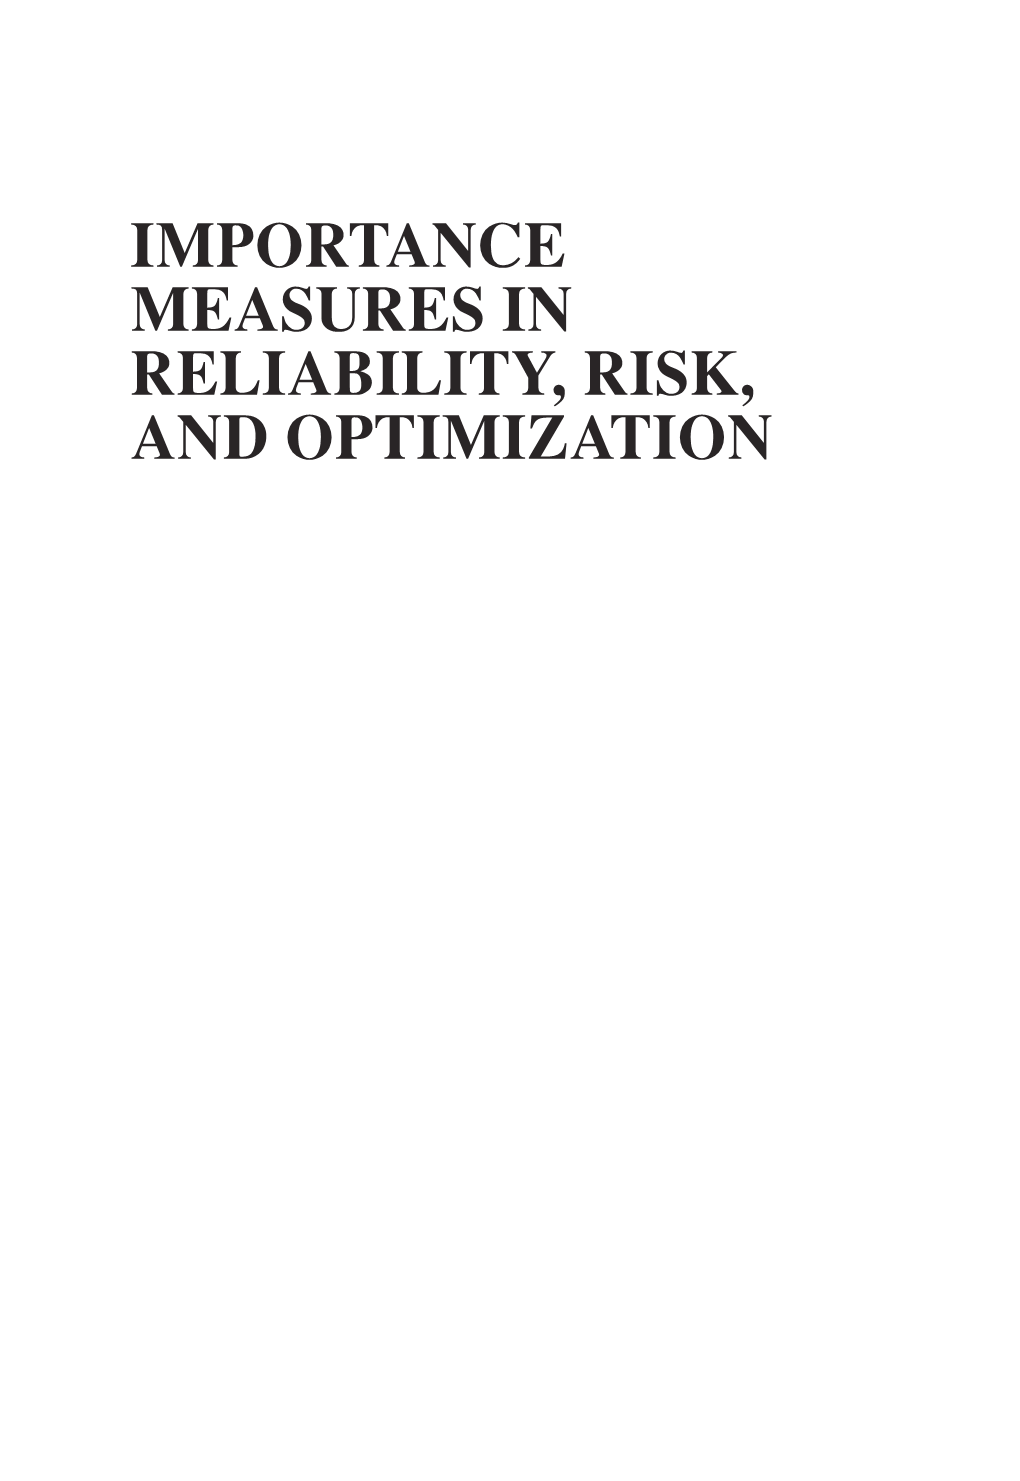 IMPORTANCE MEASURES in RELIABILITY, RISK, and OPTIMIZATION P1: TIX/XYZ P2: ABC JWST170-Fm JWST170-Kuo April 2, 2012 8:27 Printer Name: Yet to Come